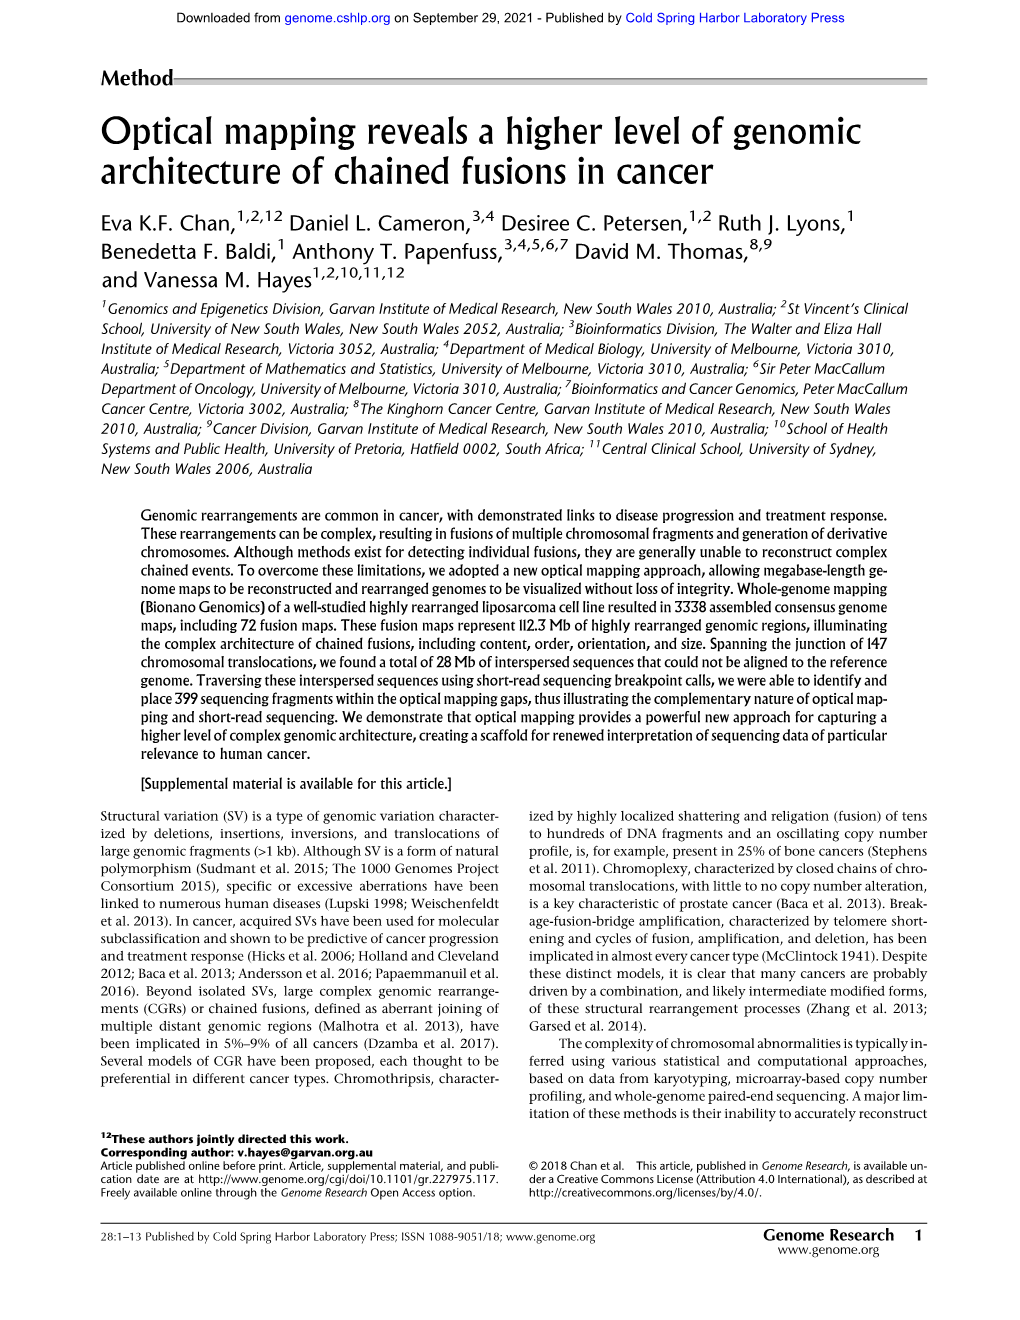 Optical Mapping Reveals a Higher Level of Genomic Architecture of Chained Fusions in Cancer